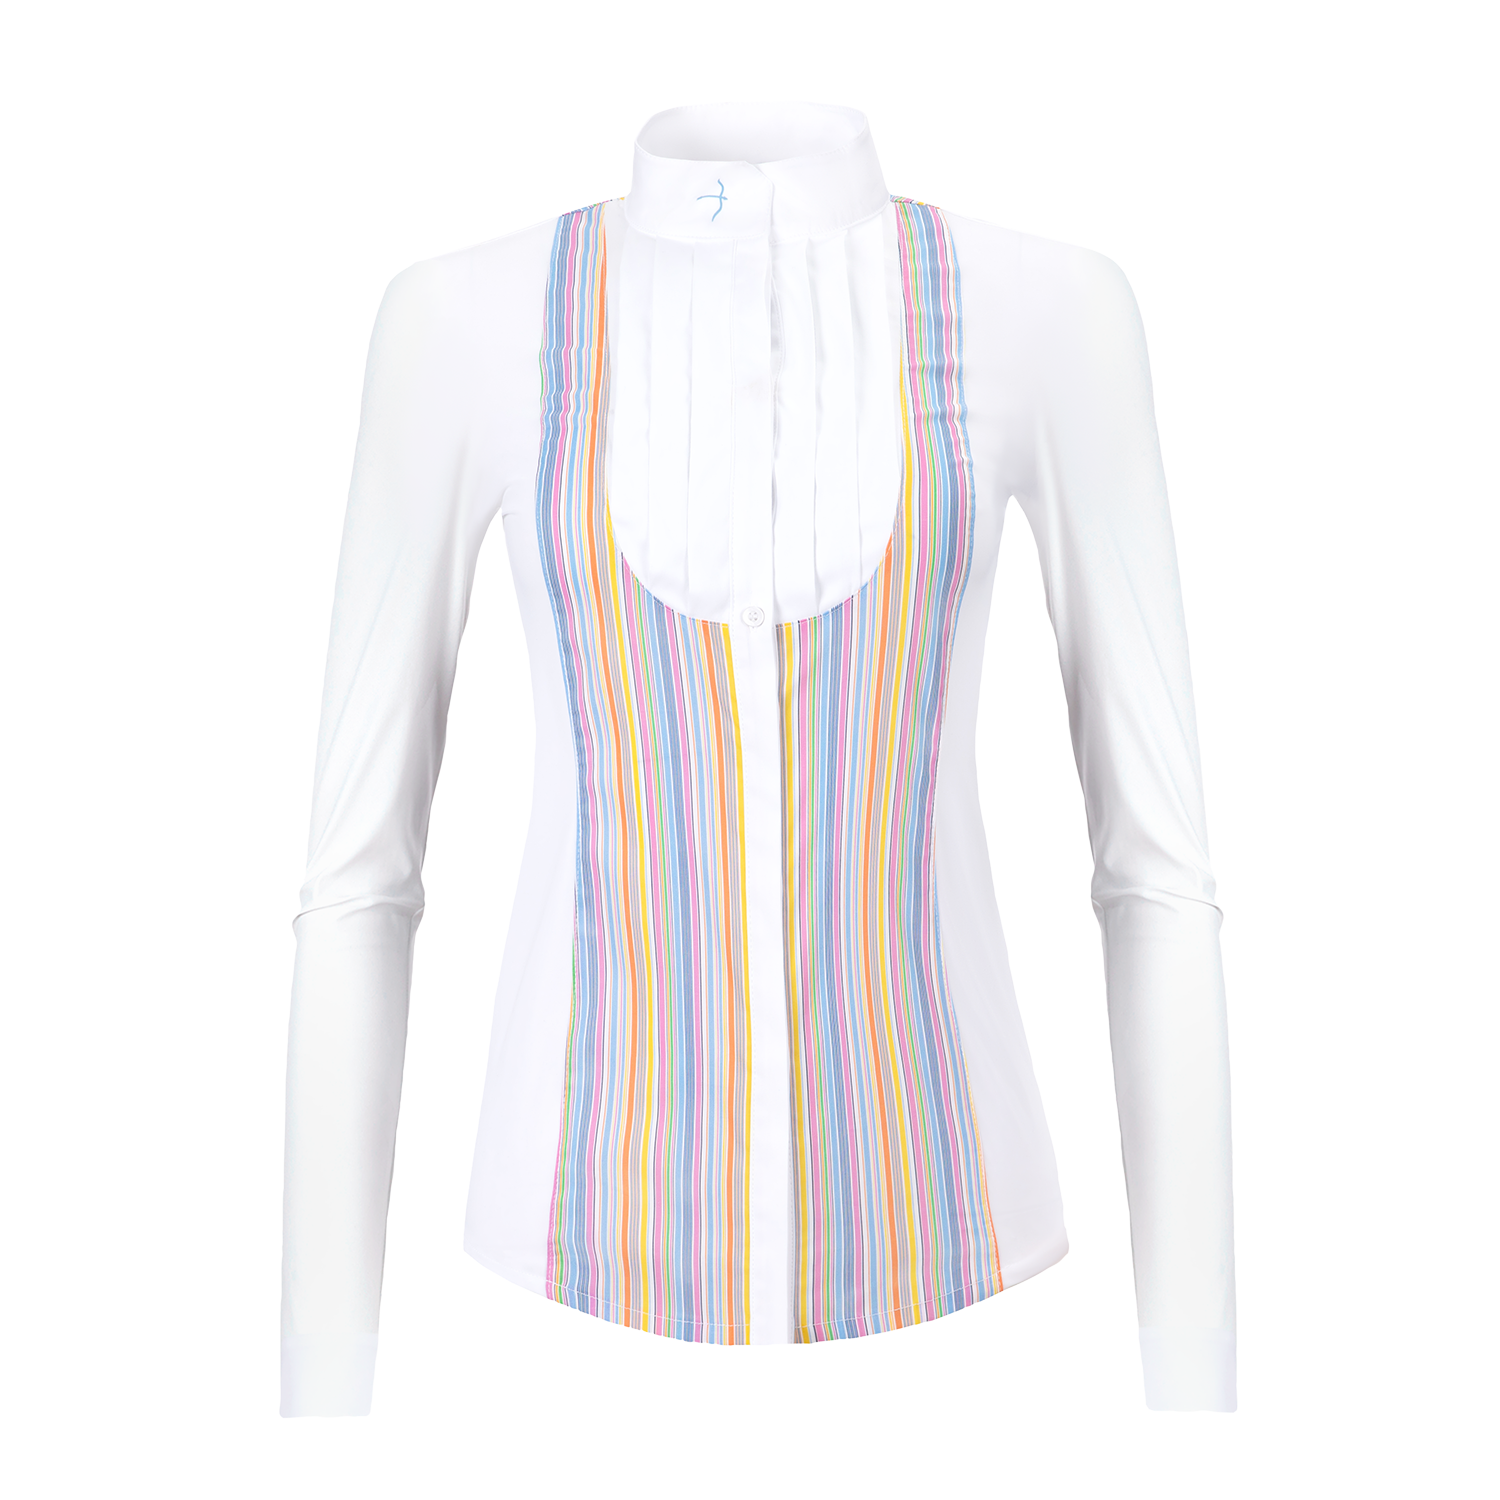 The Laila multi stripe gives a smart classic front while your jacket is on an an up to date twist when off.  The Laila has a soft woven pleated front with fine soft stretch jersey sides and sleeves. A very fine woven stretch stripe panels on the front and back gives the shirt maximum movement with a feminine flattering fit. The button down front placket has a hidden button over the bust to avoid popping! 